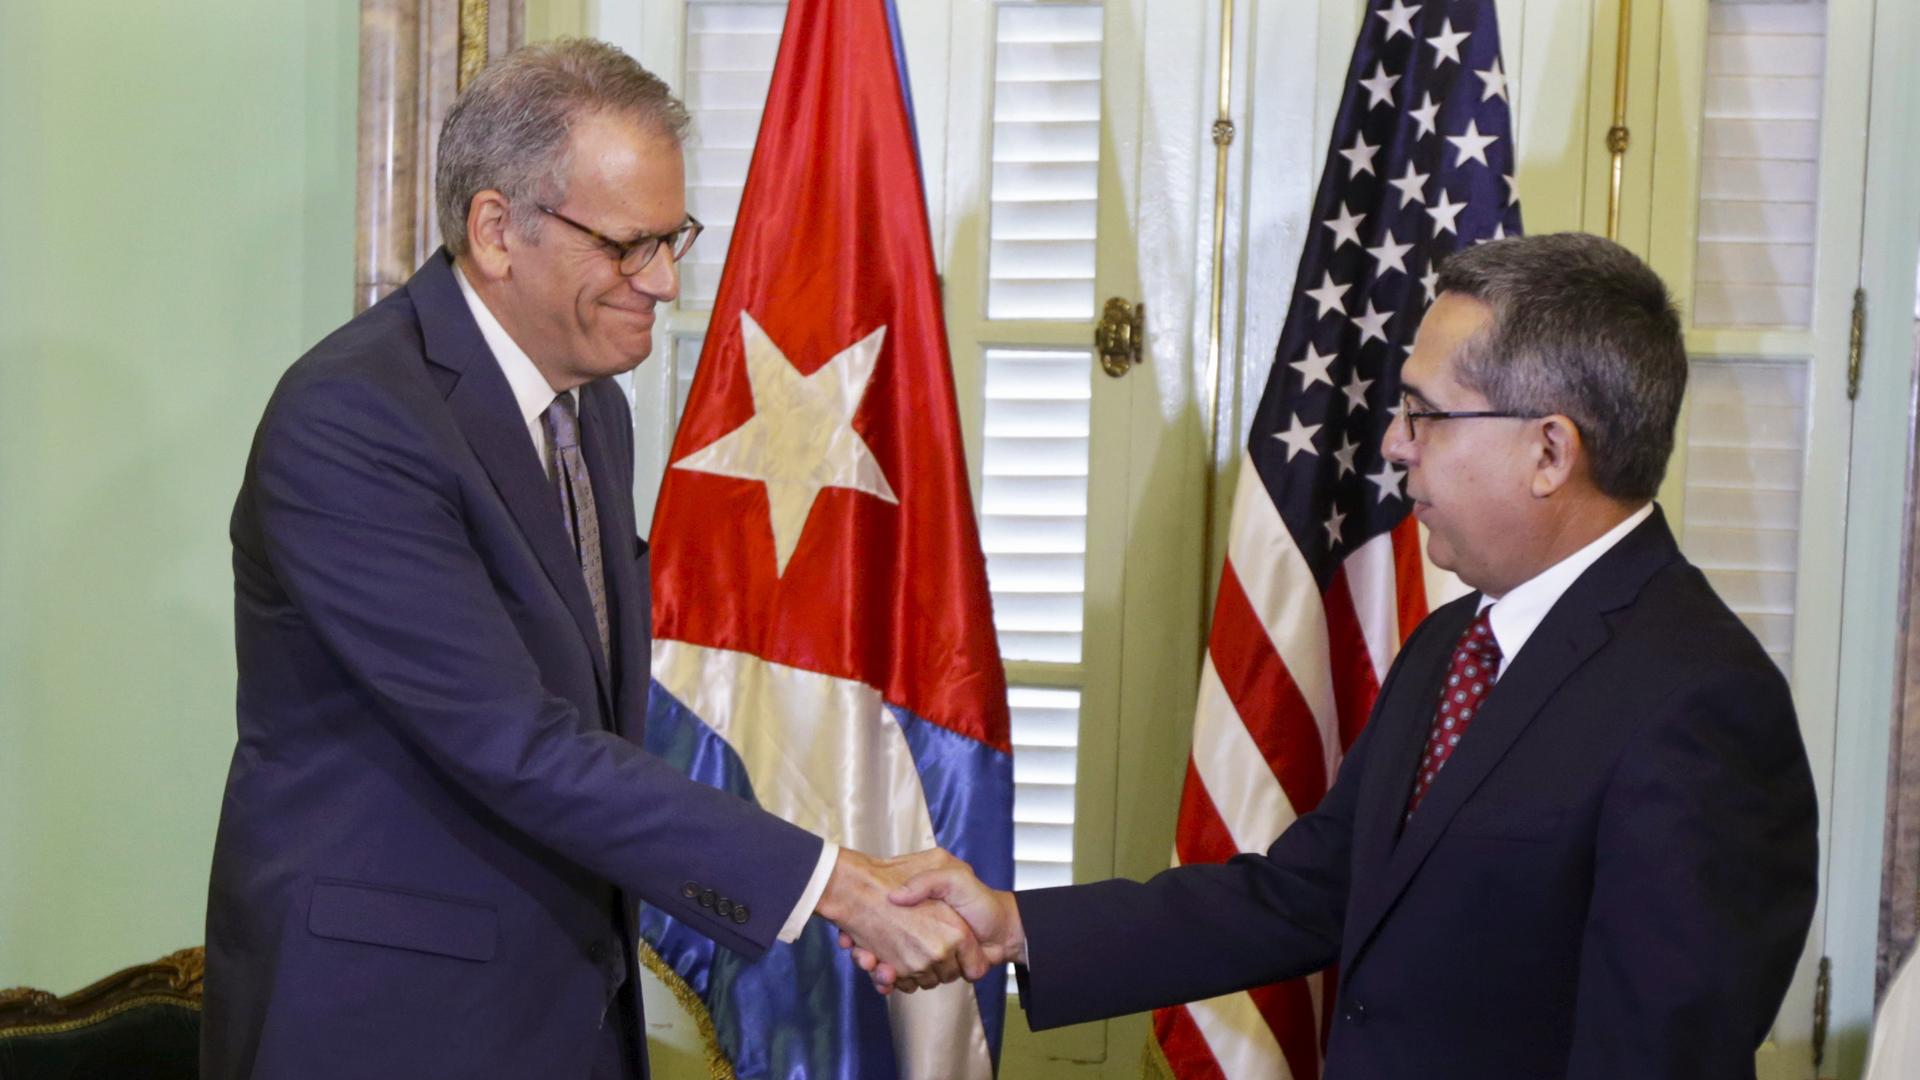 Chief of Mission at the US Interests Section in Havana Jeffrey DeLaurentis (L) shakes hands with Cuba's interim Foreign Minister Marcelino Medina in Havana July 1, 2015.